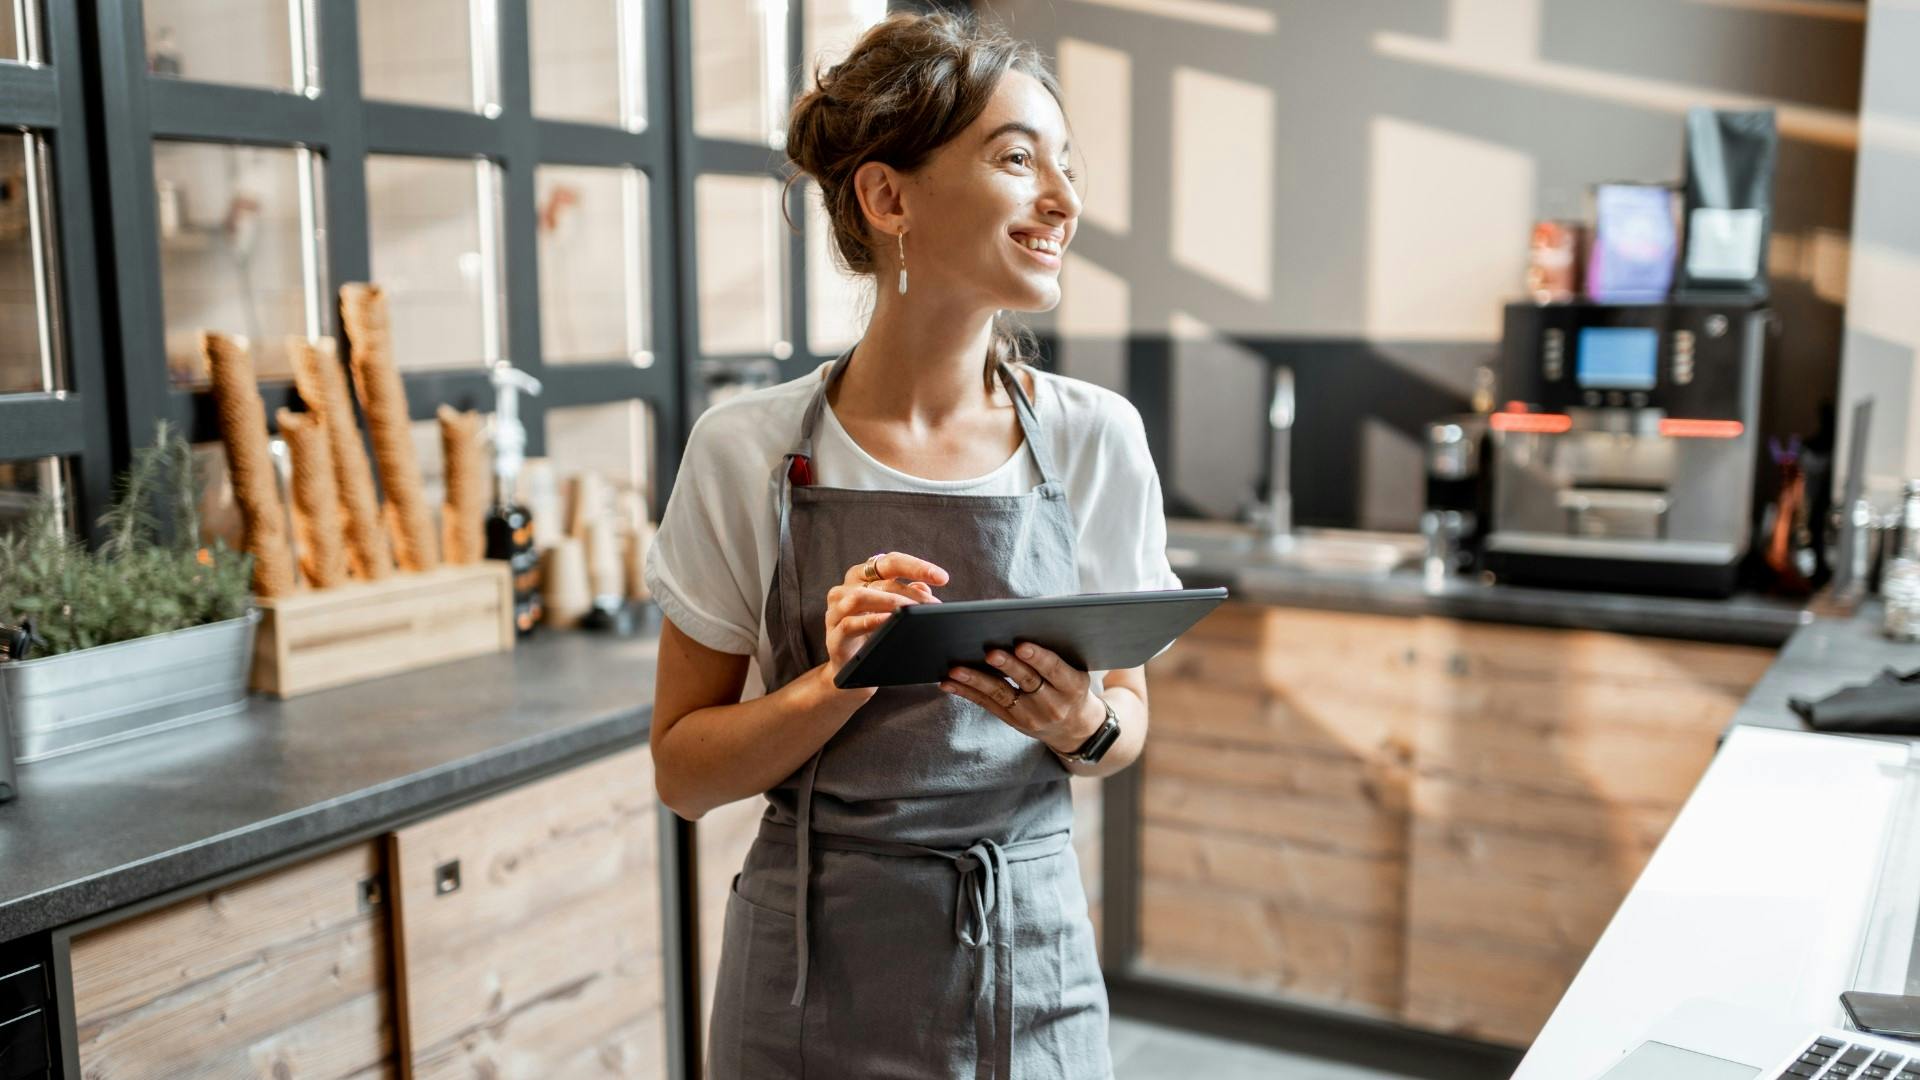 Smiling cashier holding a tablet, looking into the distance